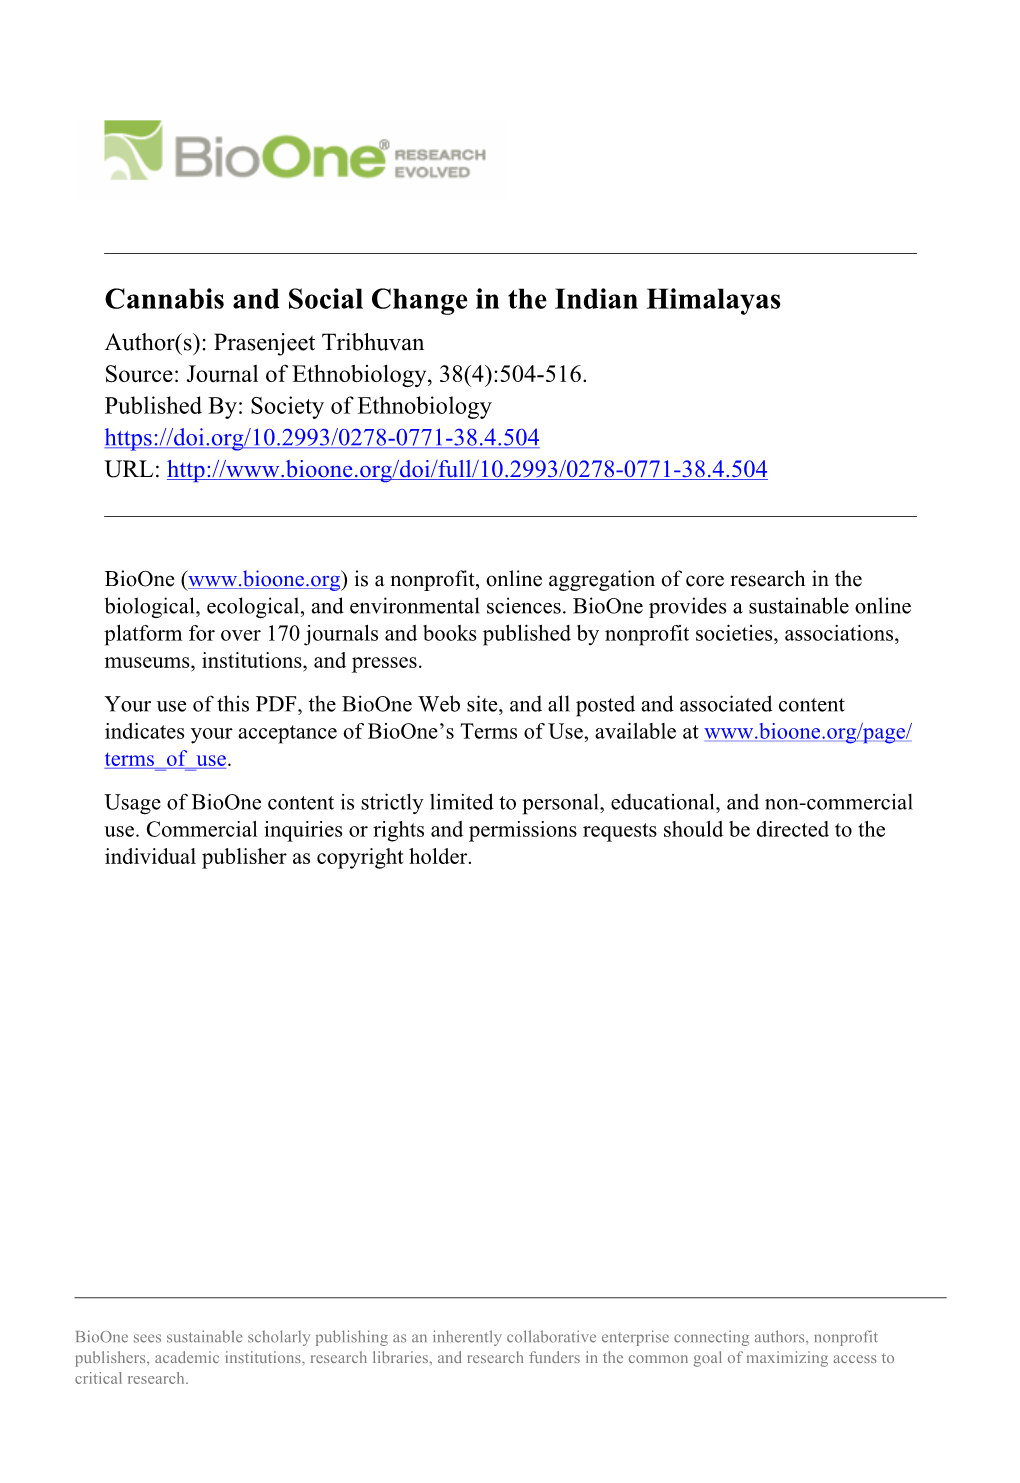 Cannabis and Social Change in the Indian Himalayas Author(S): Prasenjeet Tribhuvan Source: Journal of Ethnobiology, 38(4):504-516